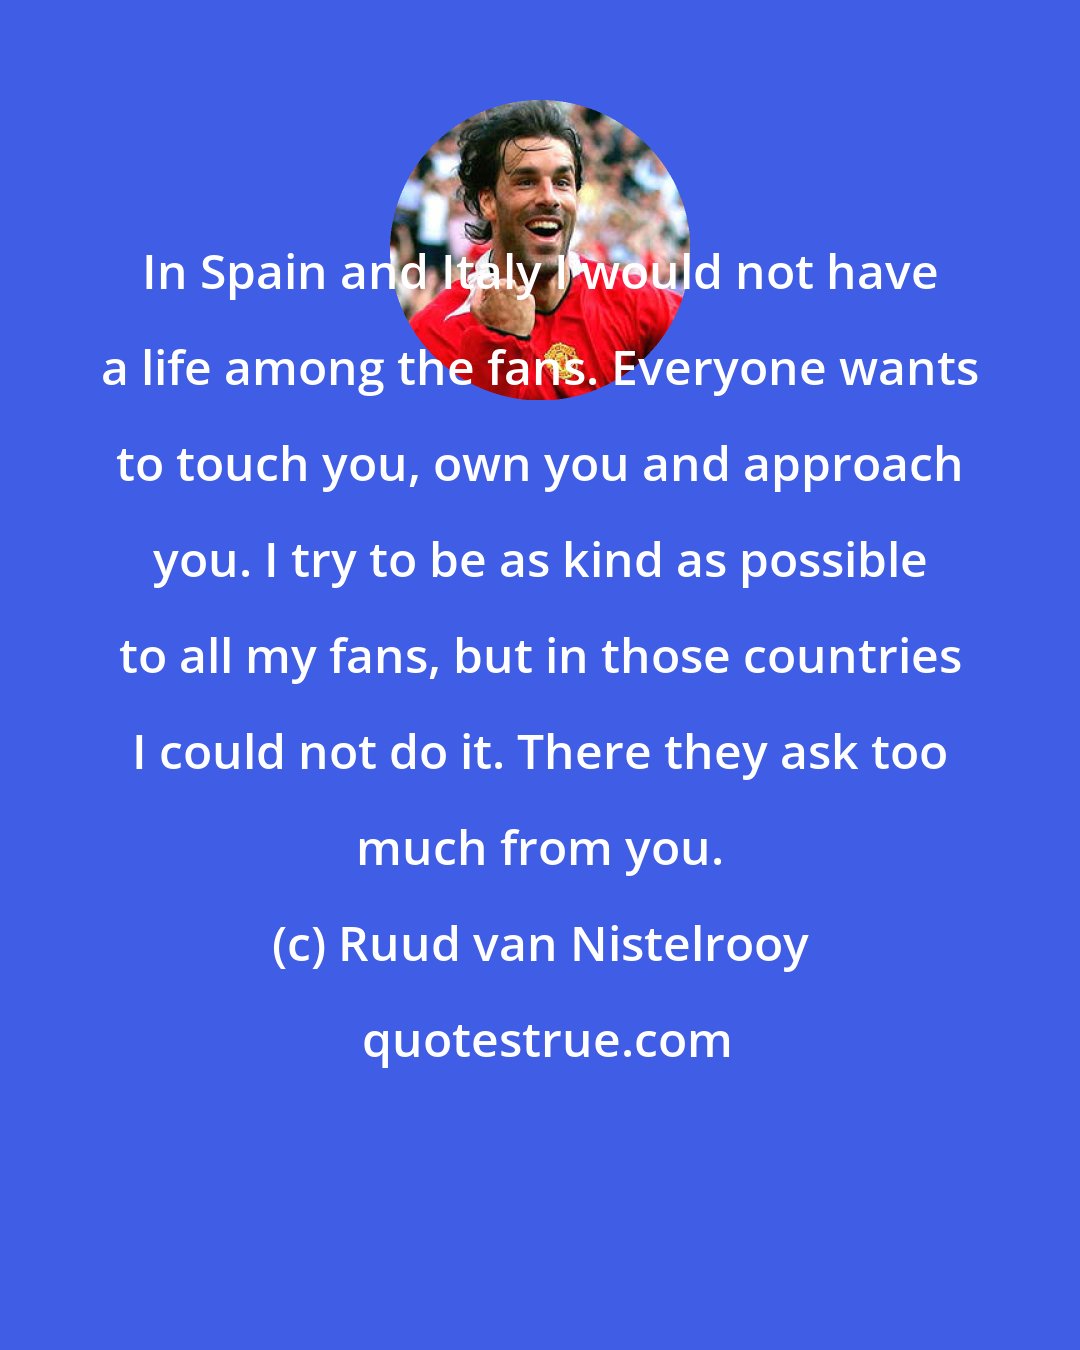 Ruud van Nistelrooy: In Spain and Italy I would not have a life among the fans. Everyone wants to touch you, own you and approach you. I try to be as kind as possible to all my fans, but in those countries I could not do it. There they ask too much from you.